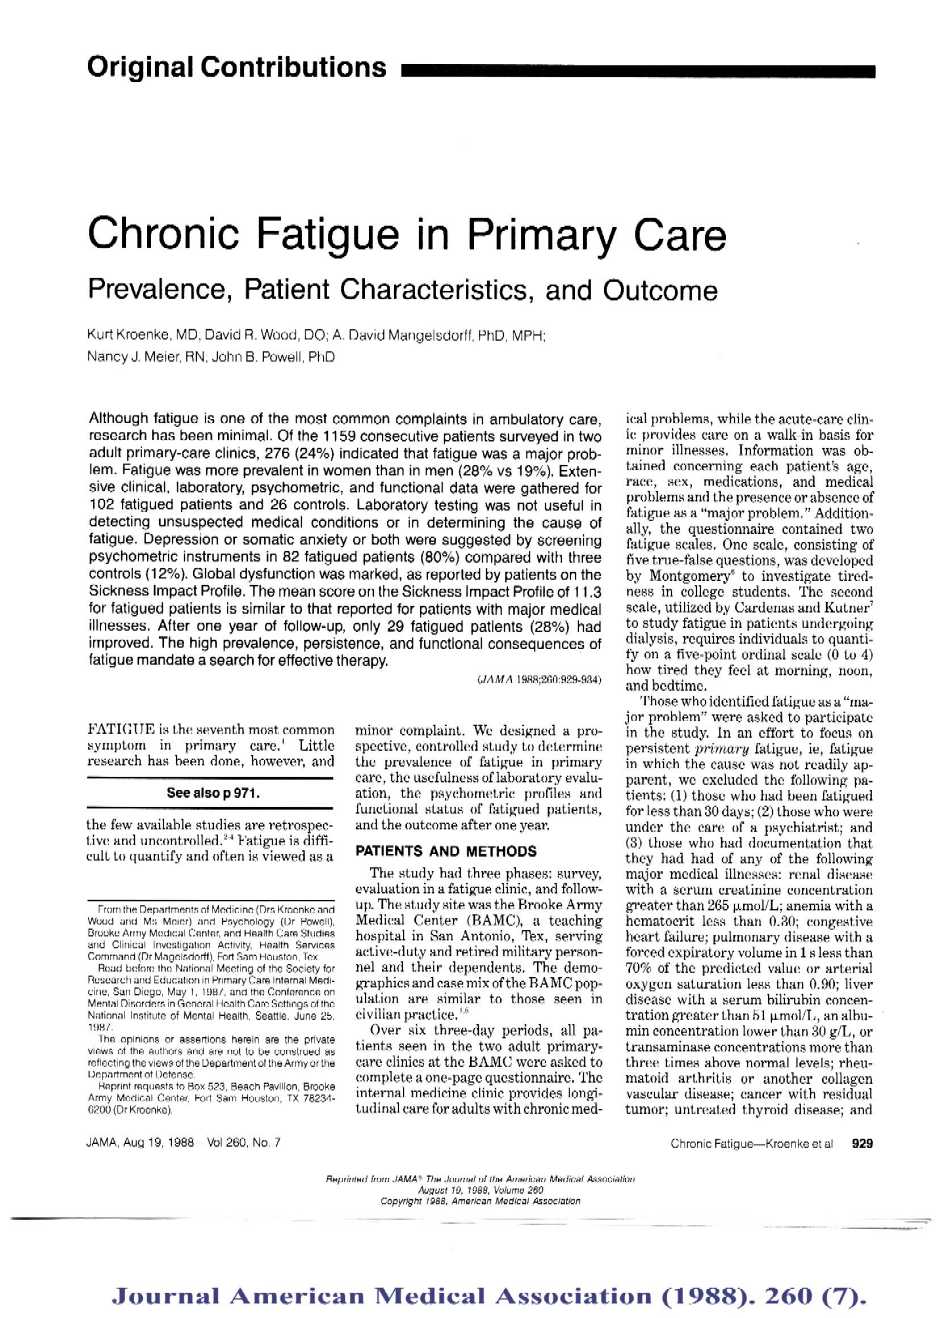 Journal American Medical Association (1988): Chronic fatigue in primary care